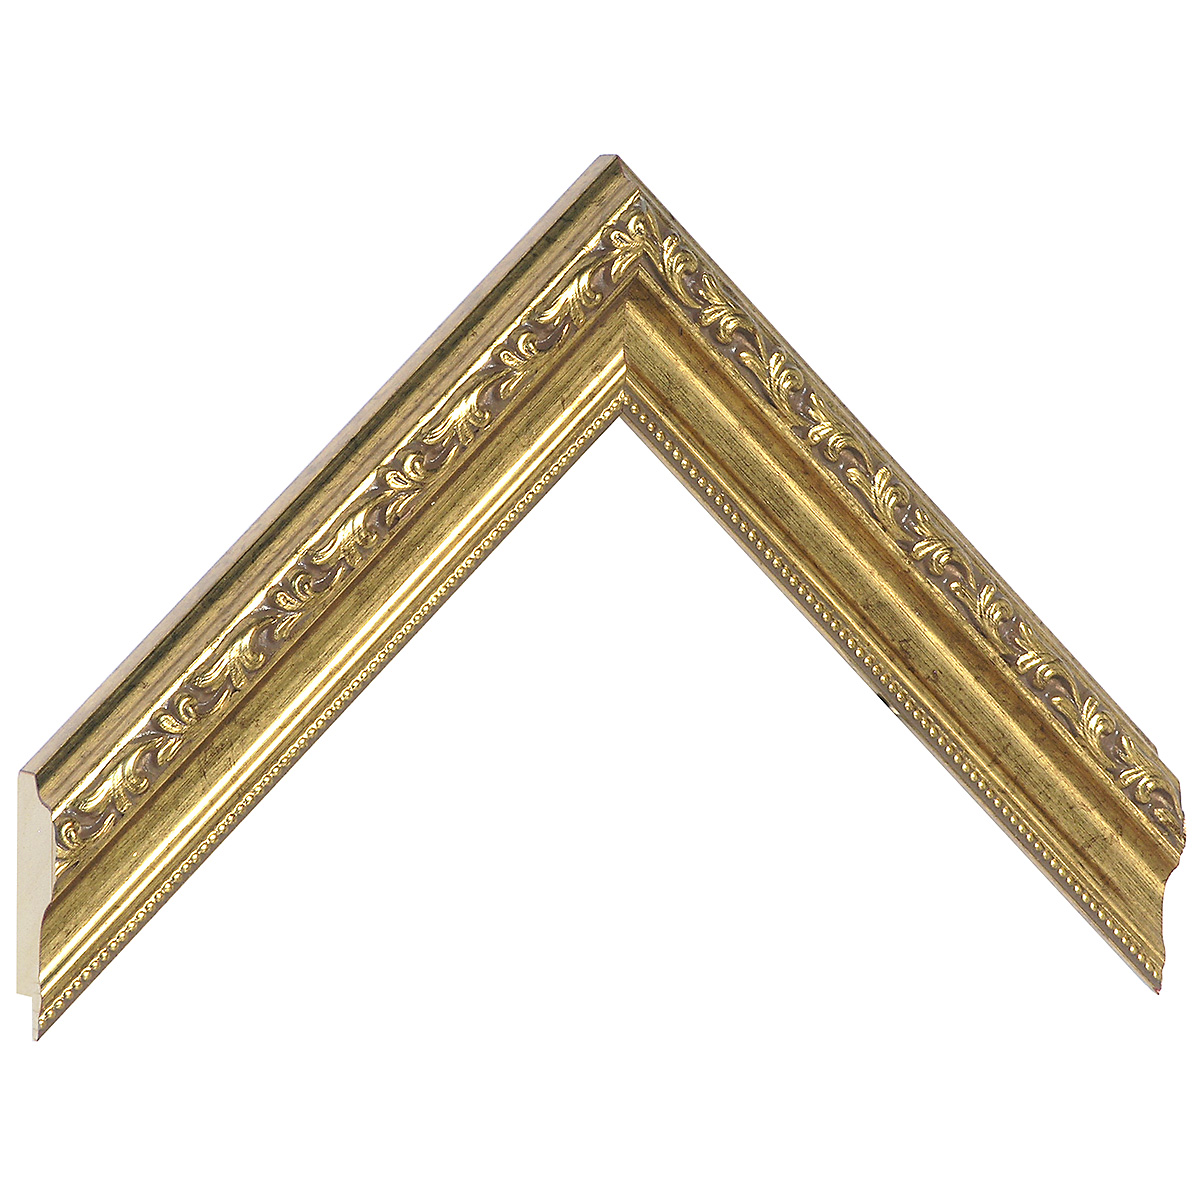 Moulding finger-jointed pine width 32mm - gold with relief decorations - Sample